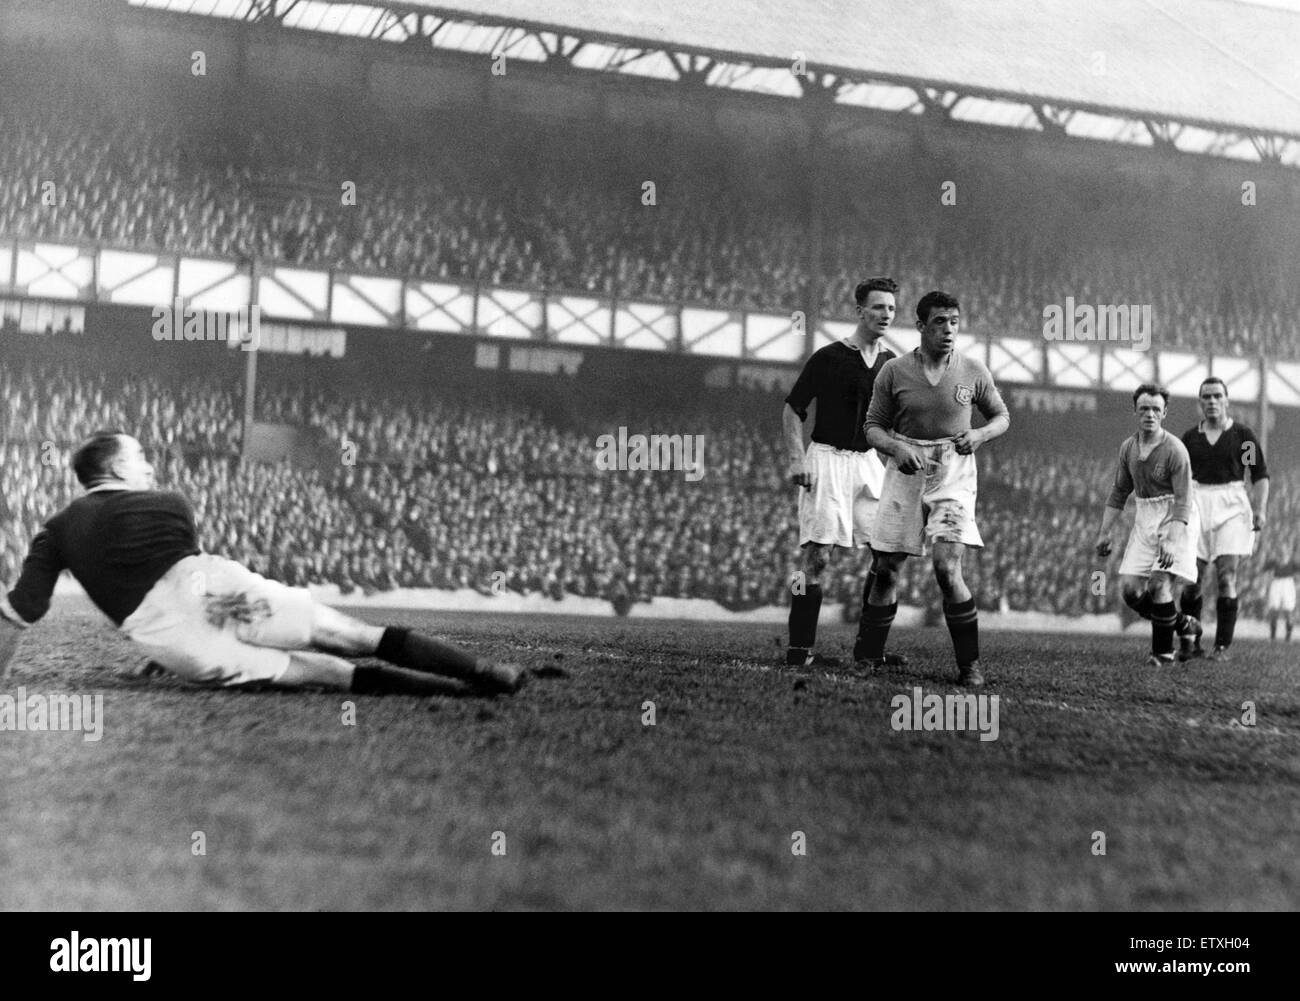 English League Division One match at  Goodison Park. Everton v Arsenal. Everton forward William 'Dixie' Dean is closely shadowed by Arsenal defender Herbie Roberts during the match. Circa 1933. Stock Photo